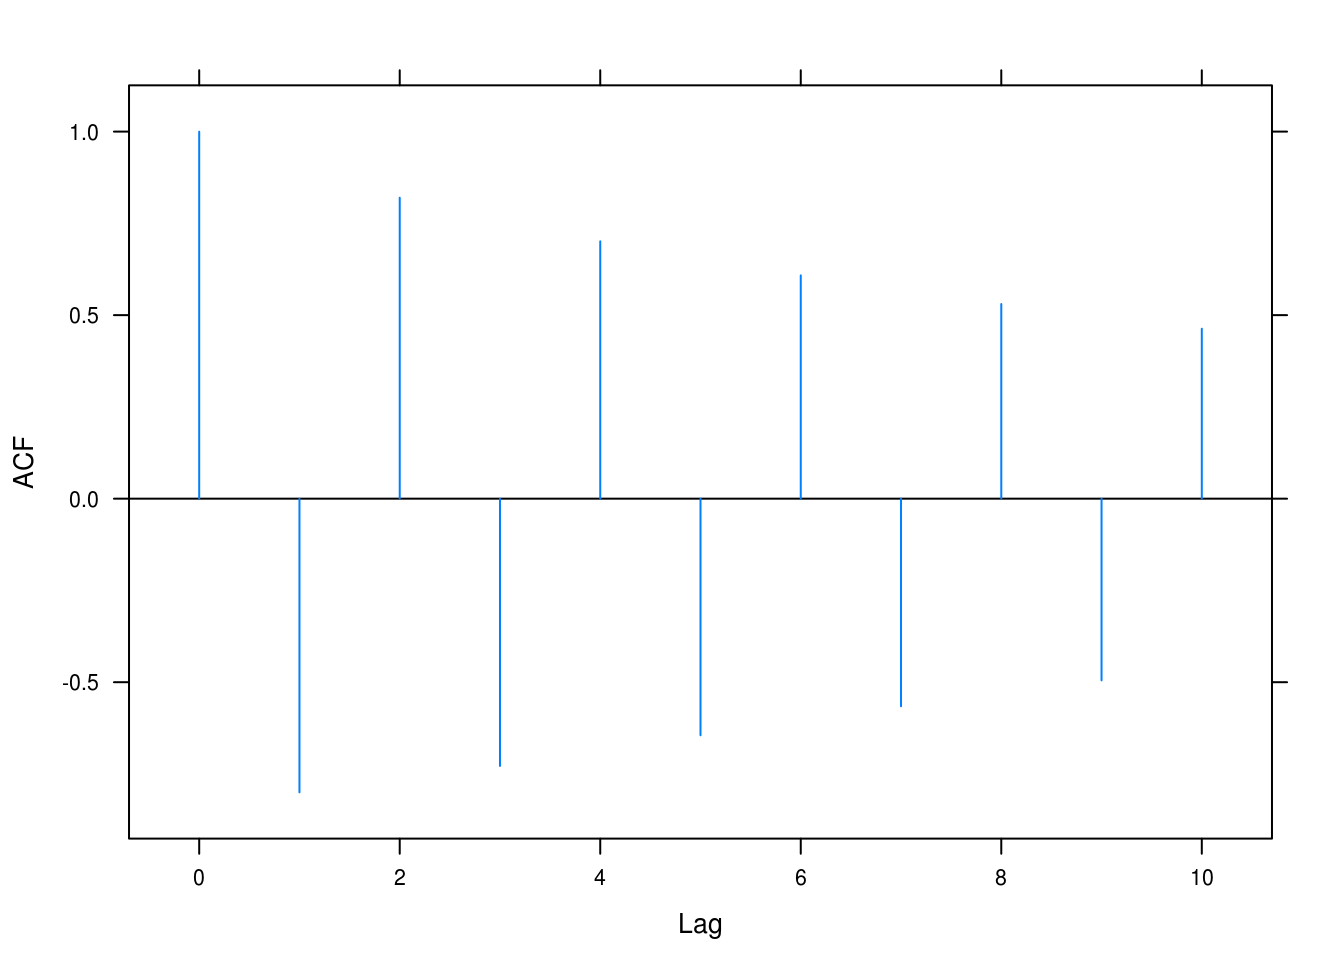 ACF for AR(2) with $\phi_1 = -0.4, \phi_2 = 0.5$.